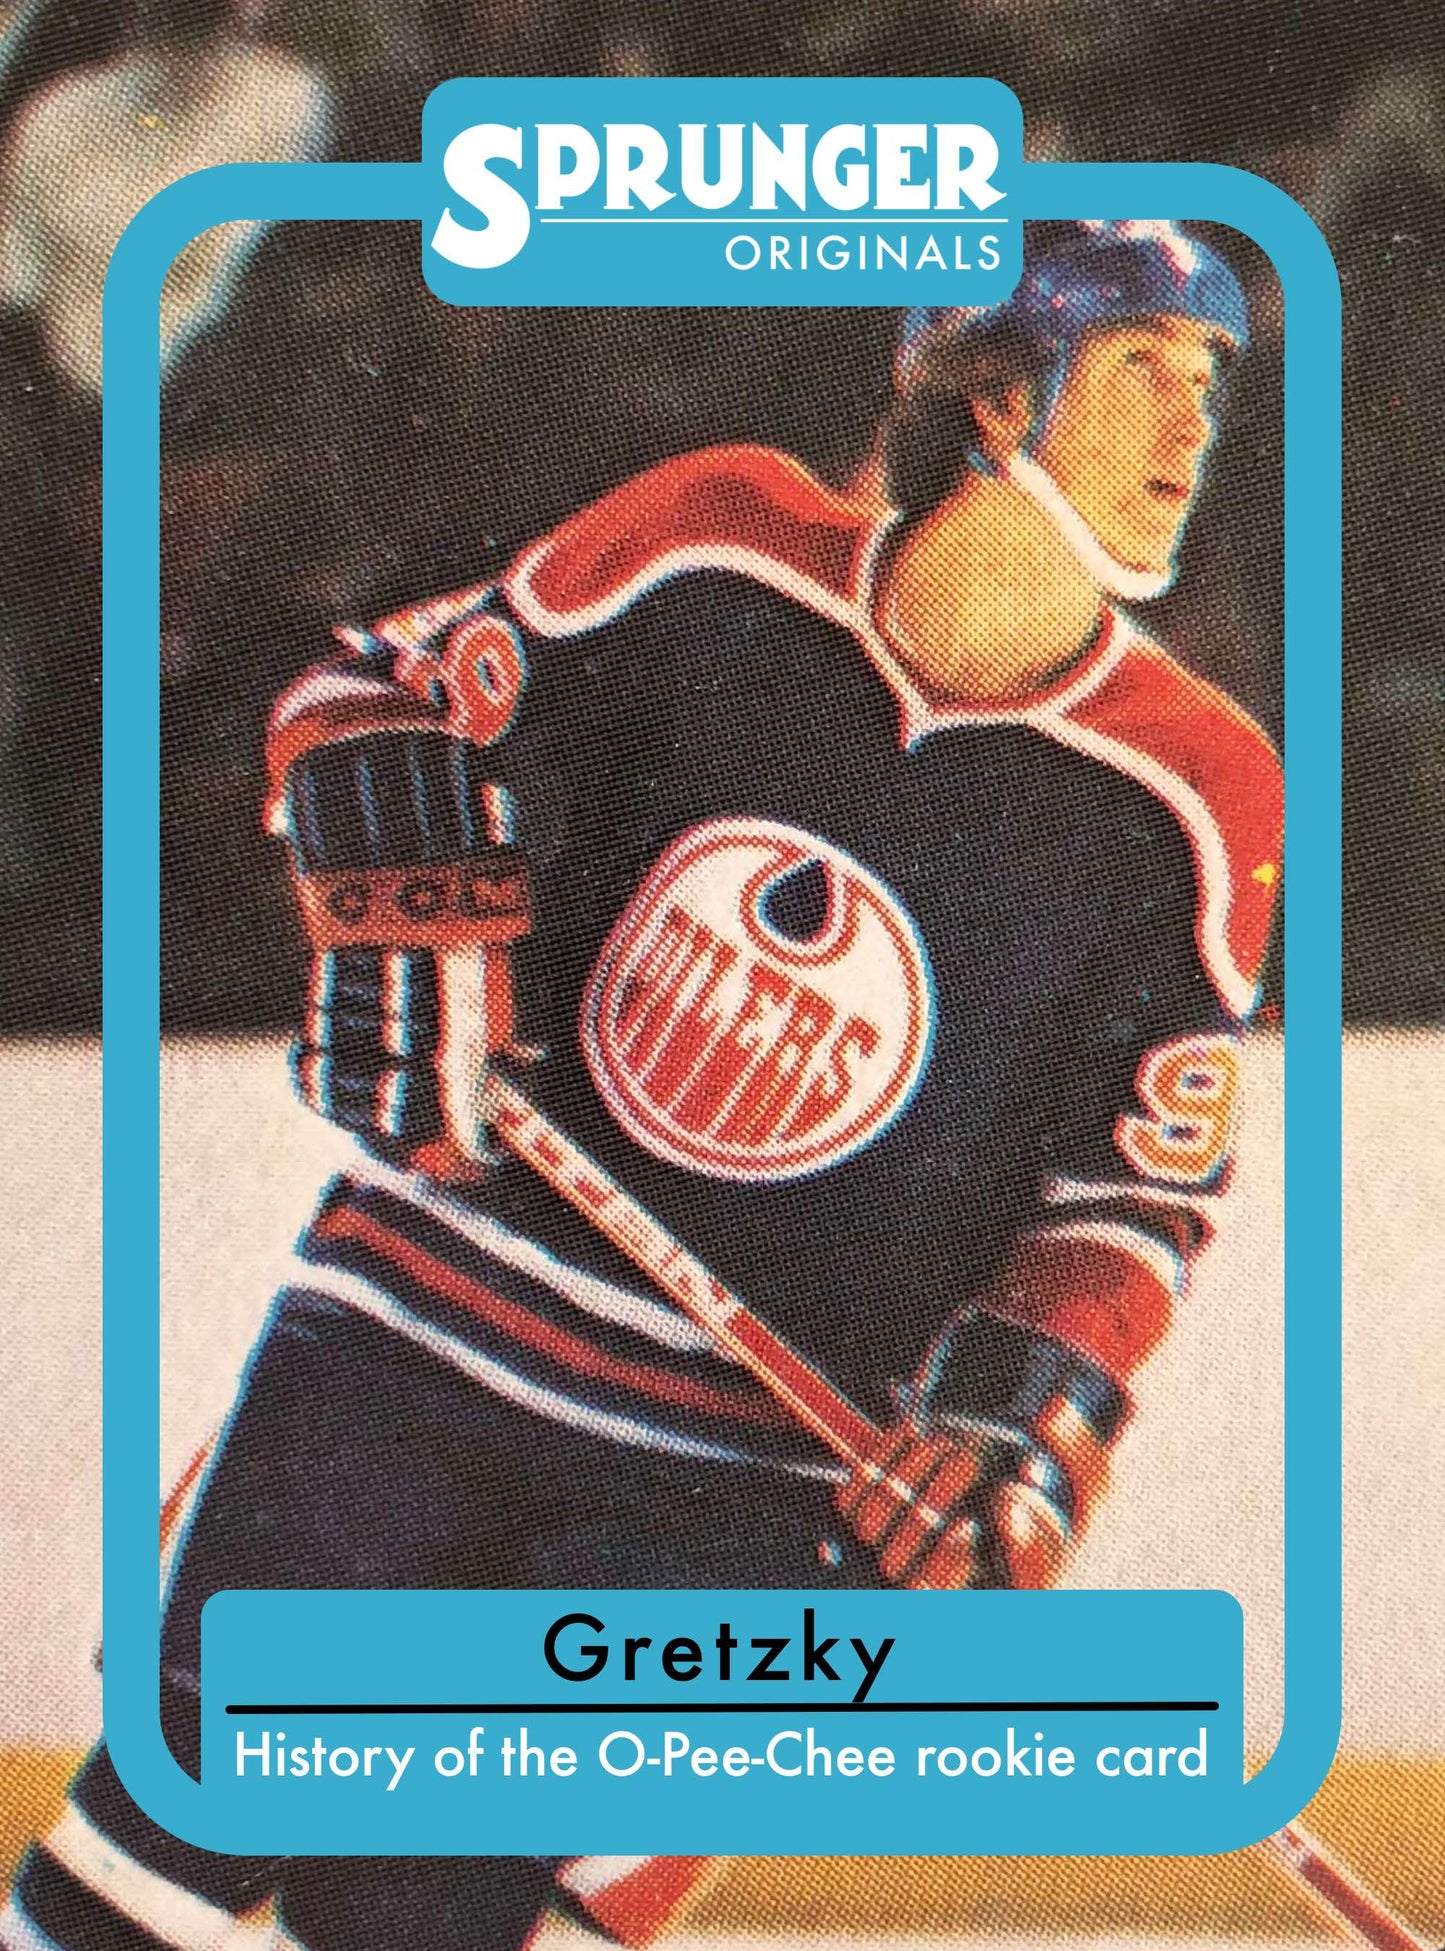 Gretzky - The history of the O-Pee-Chee rookie card (2nd print edition)